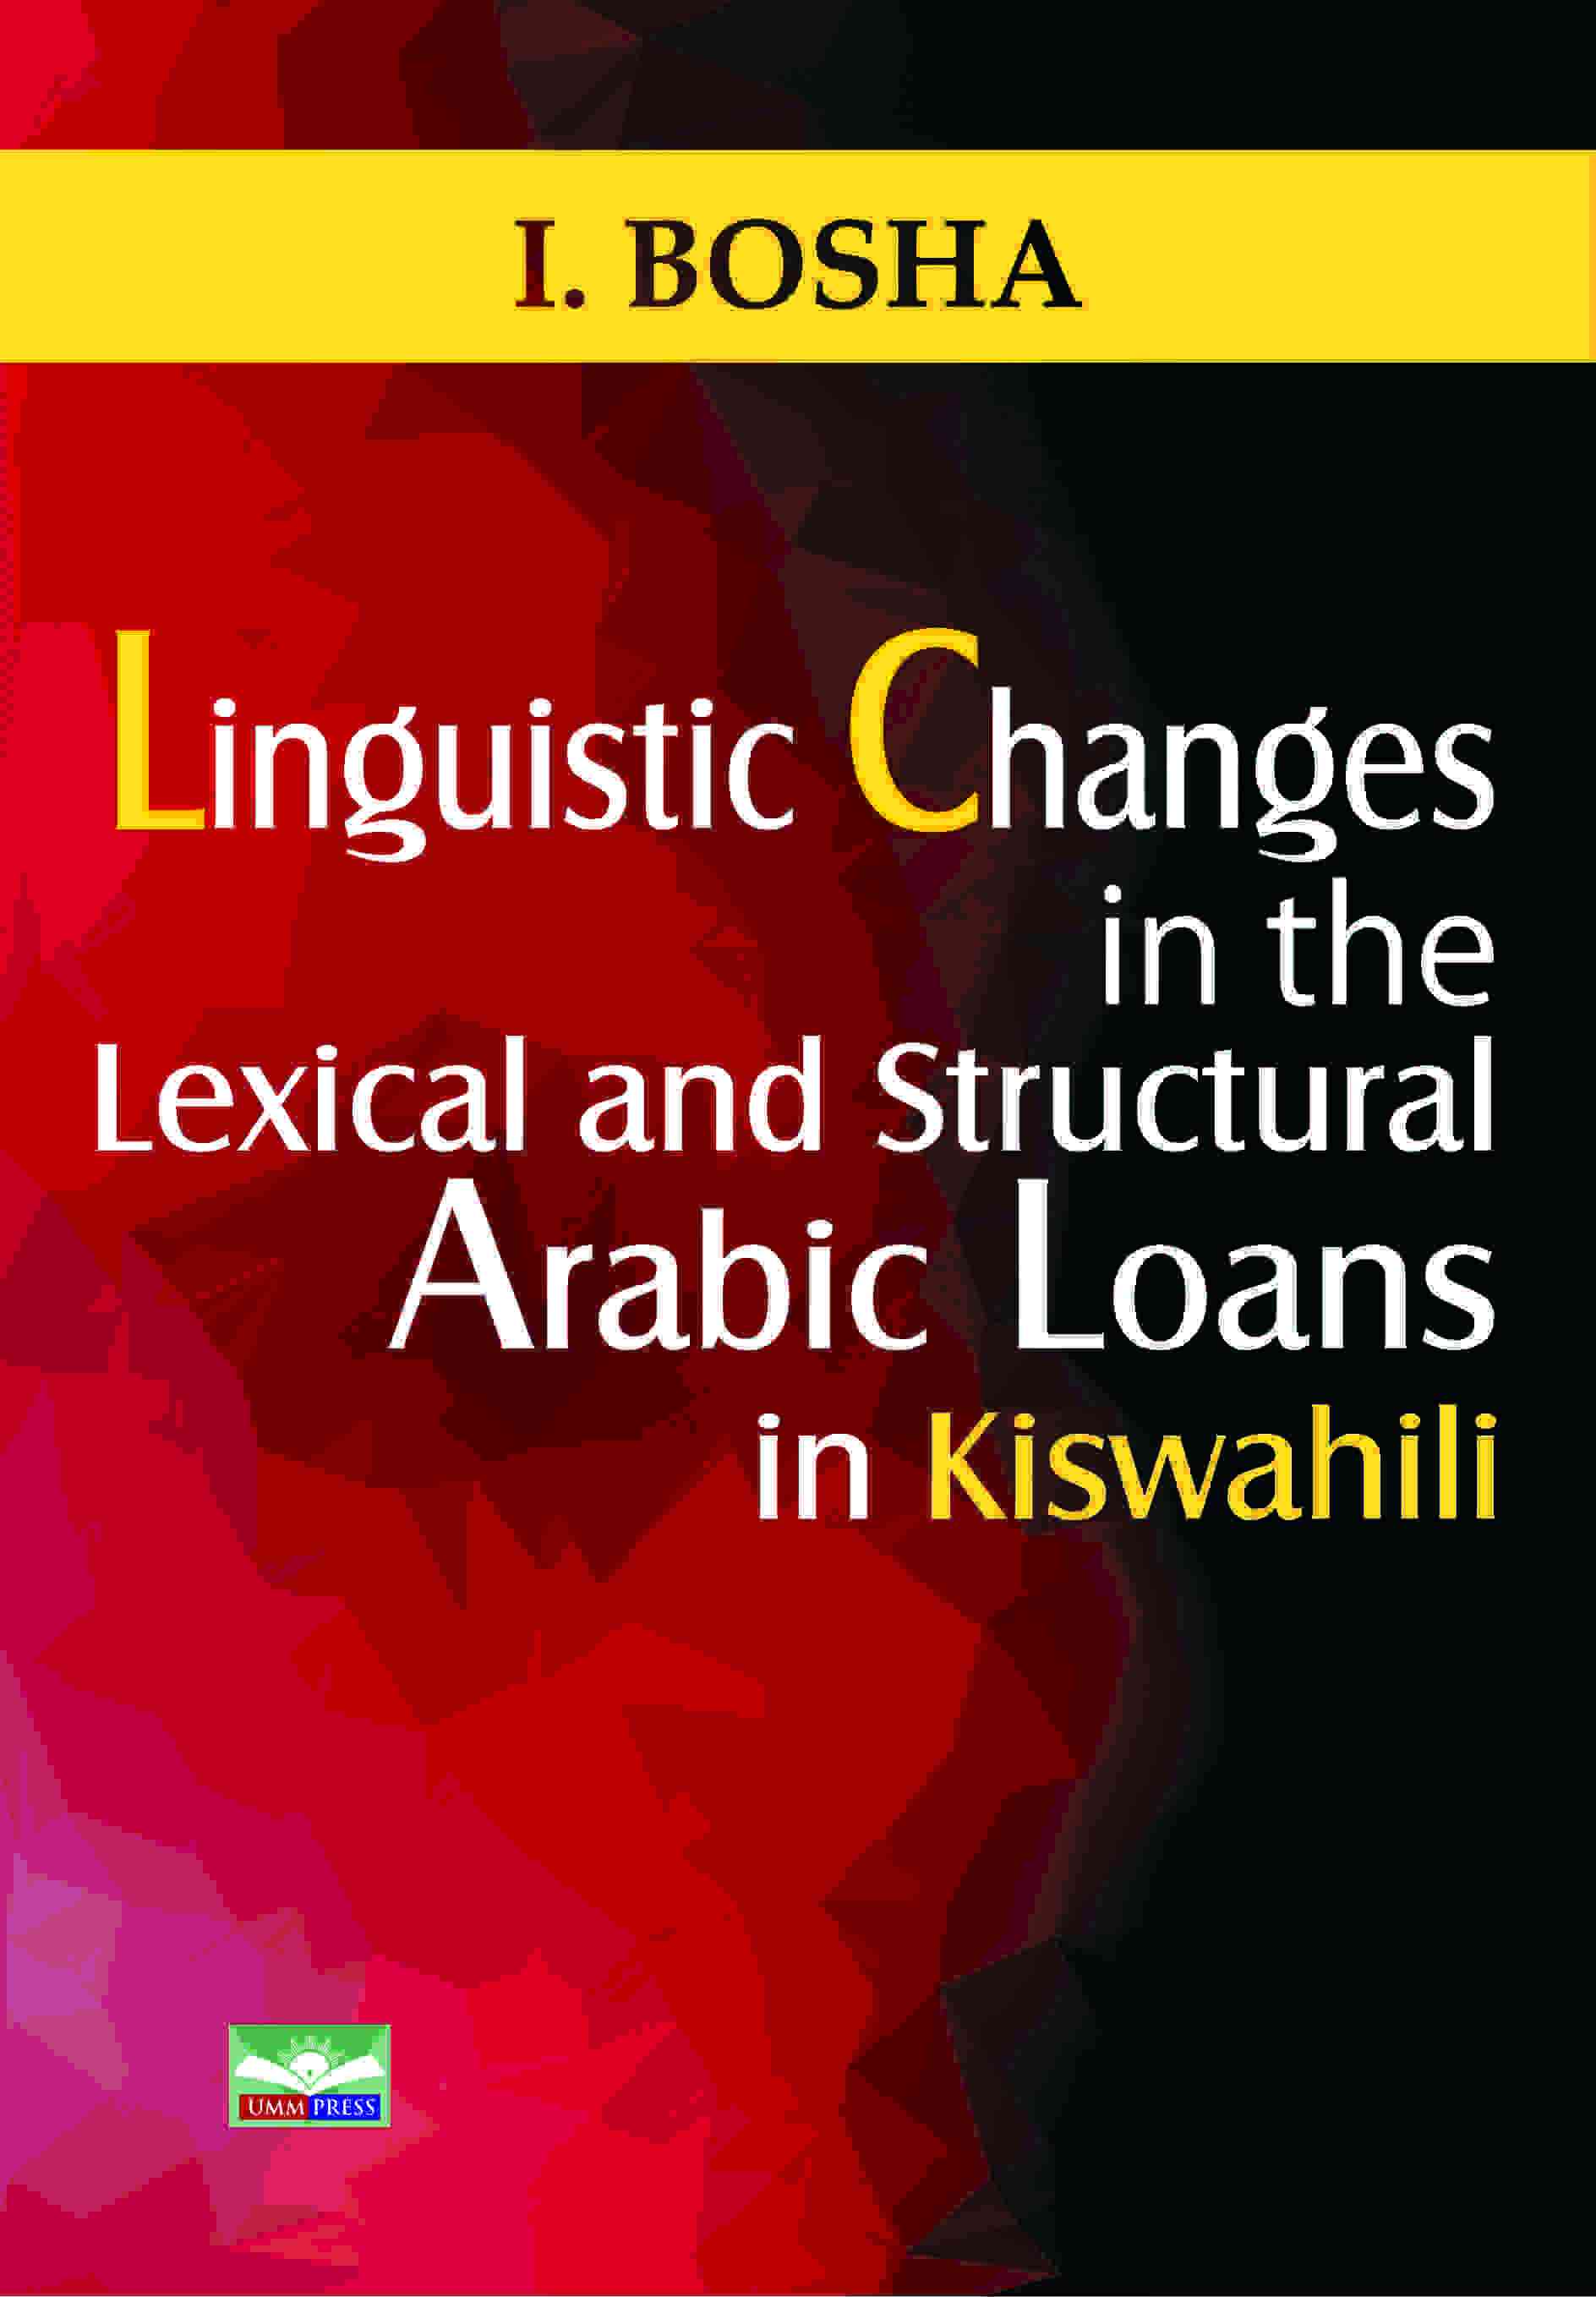 LINGUISTIC CHANGES IN THE LEXICAL AND STRUCTURAL ARABIC LOANS IN KISWAHILI